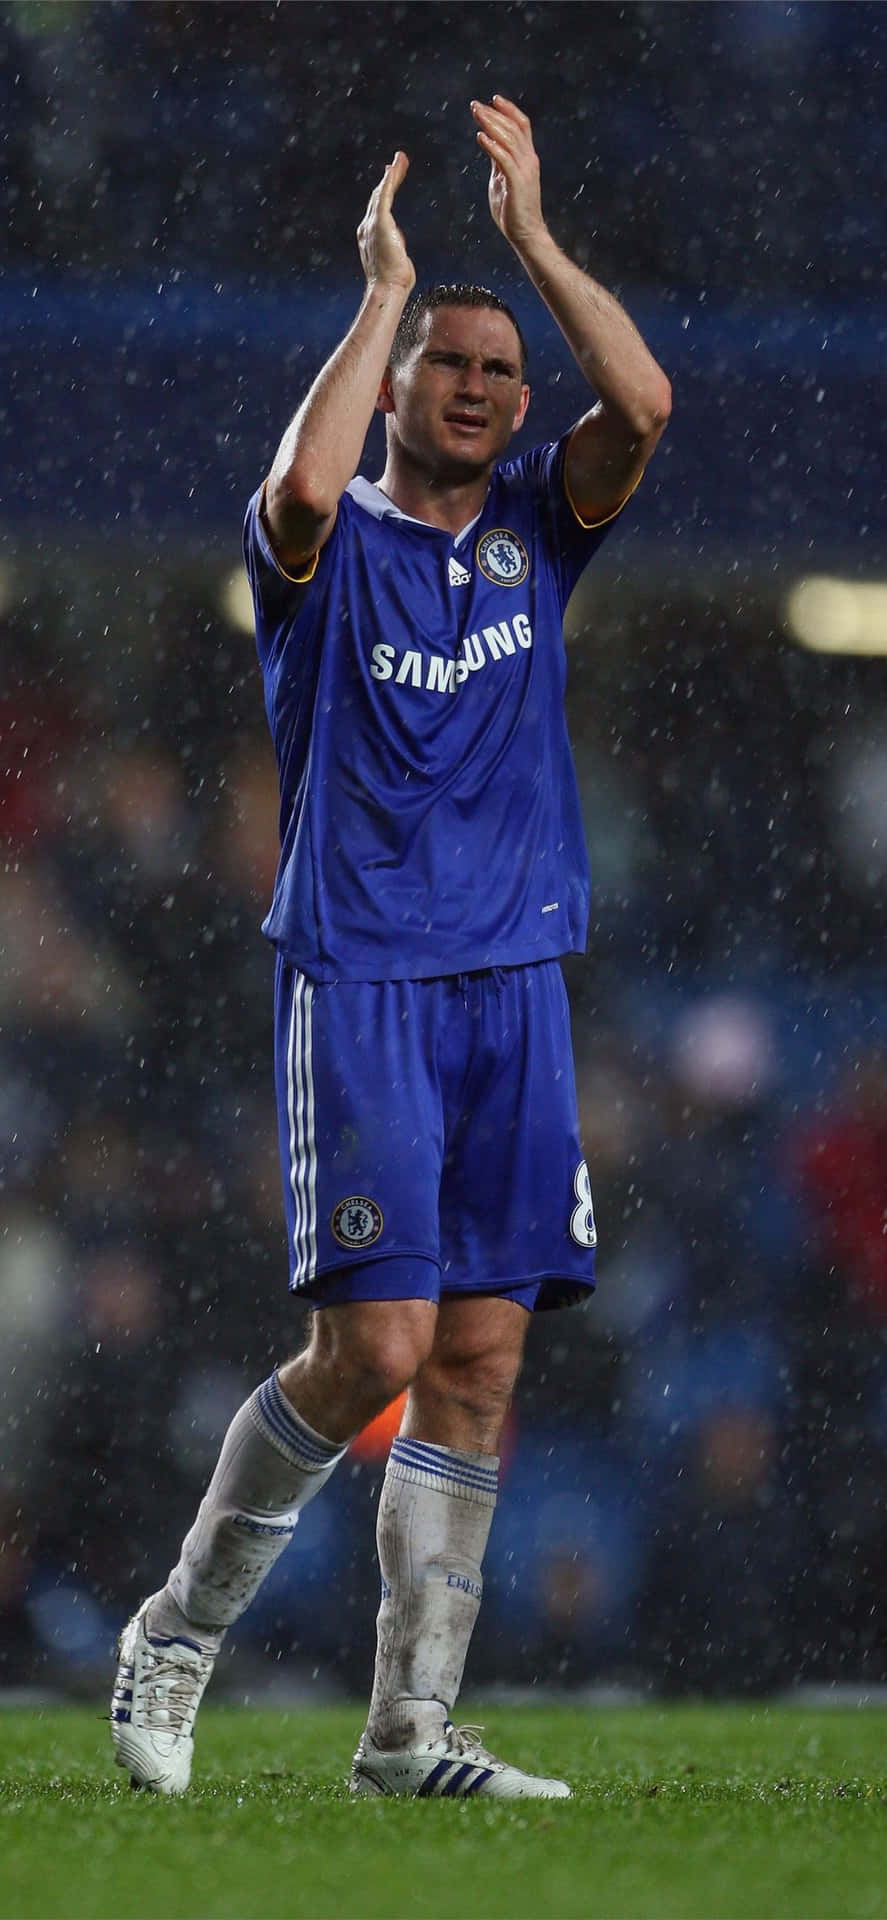 Clapping Player Chelsea Iphone Wallpaper